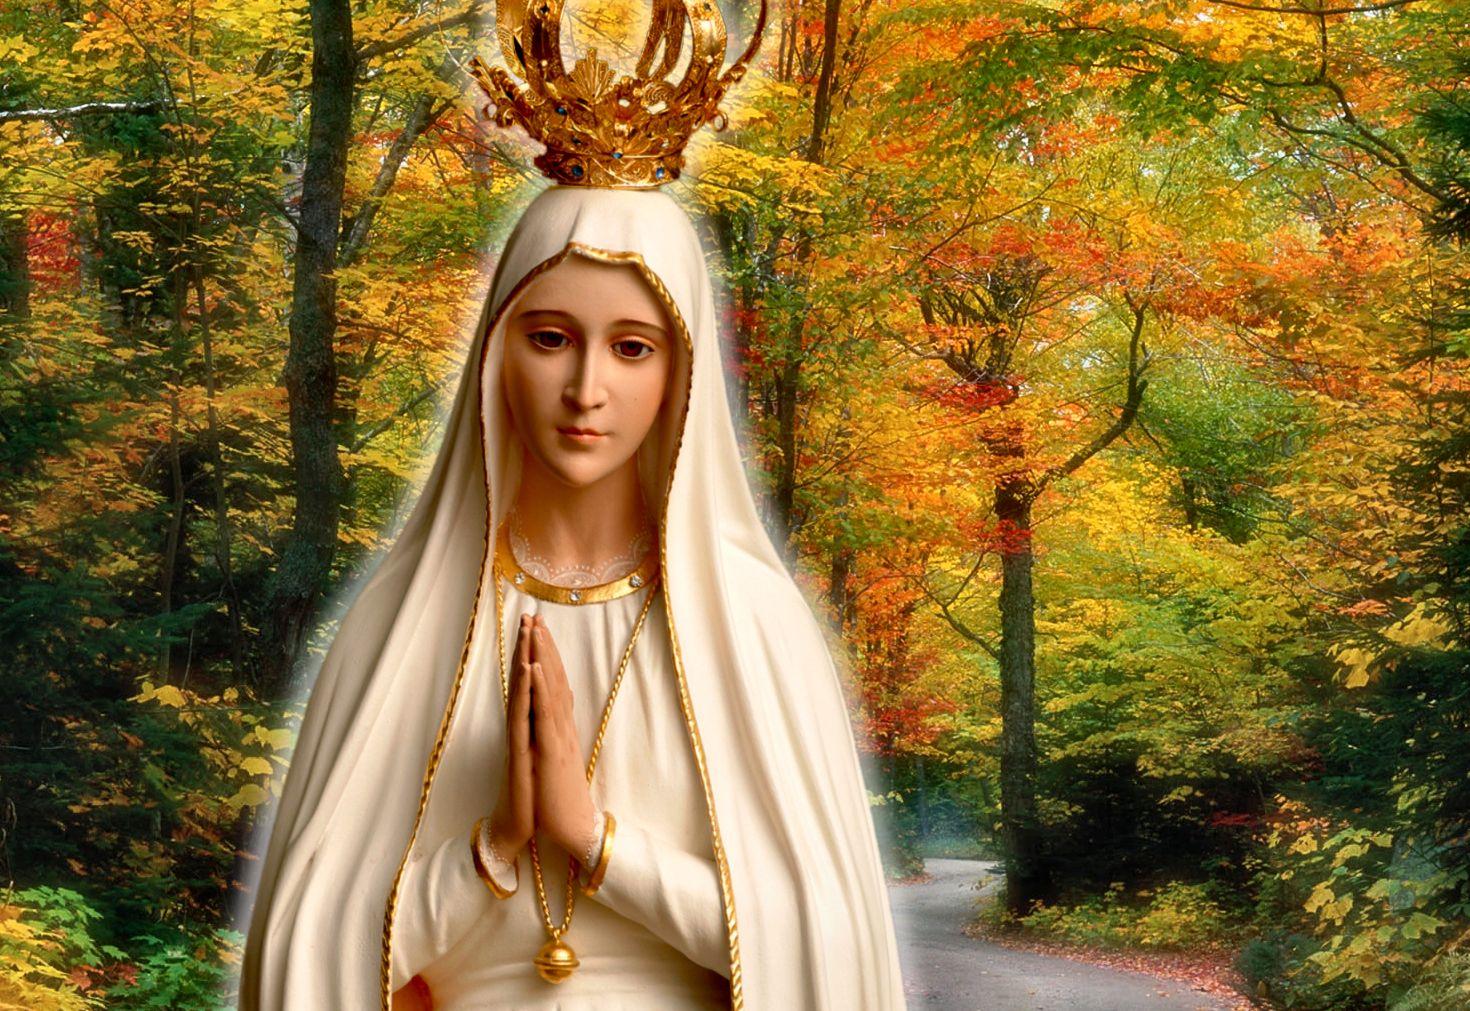 Our lady of fatima.